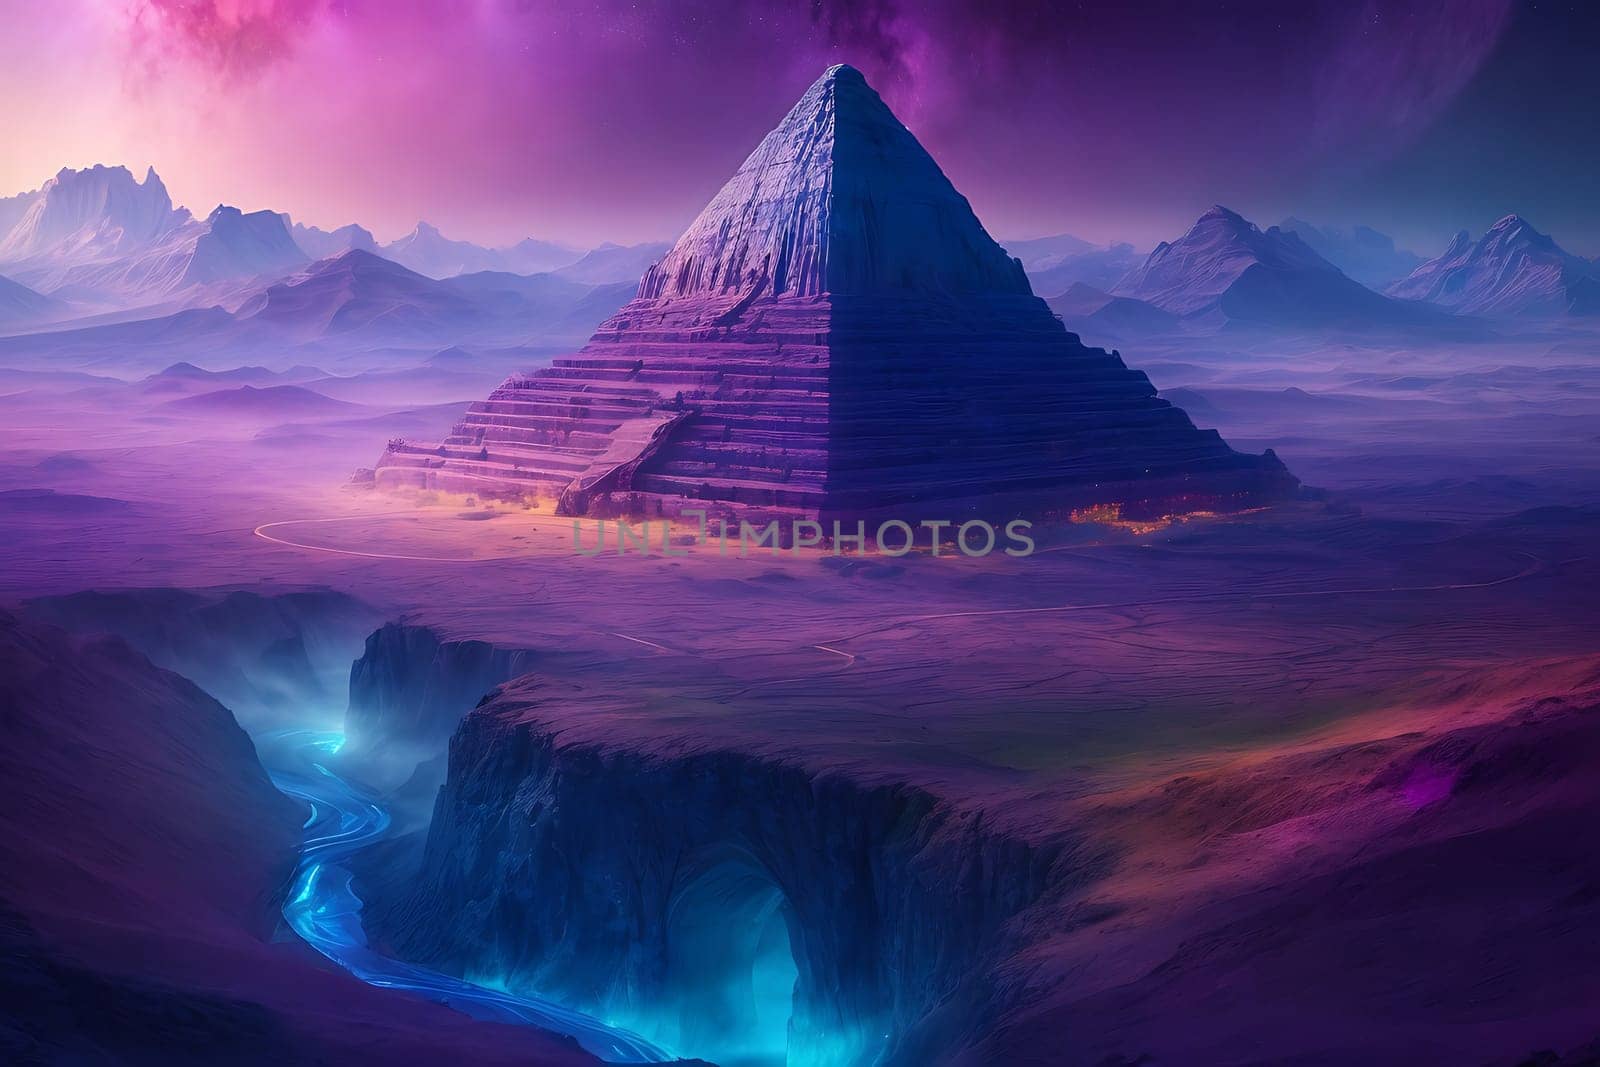 A striking painting capturing the splendor of a pyramid towering over a vast, arid desert.